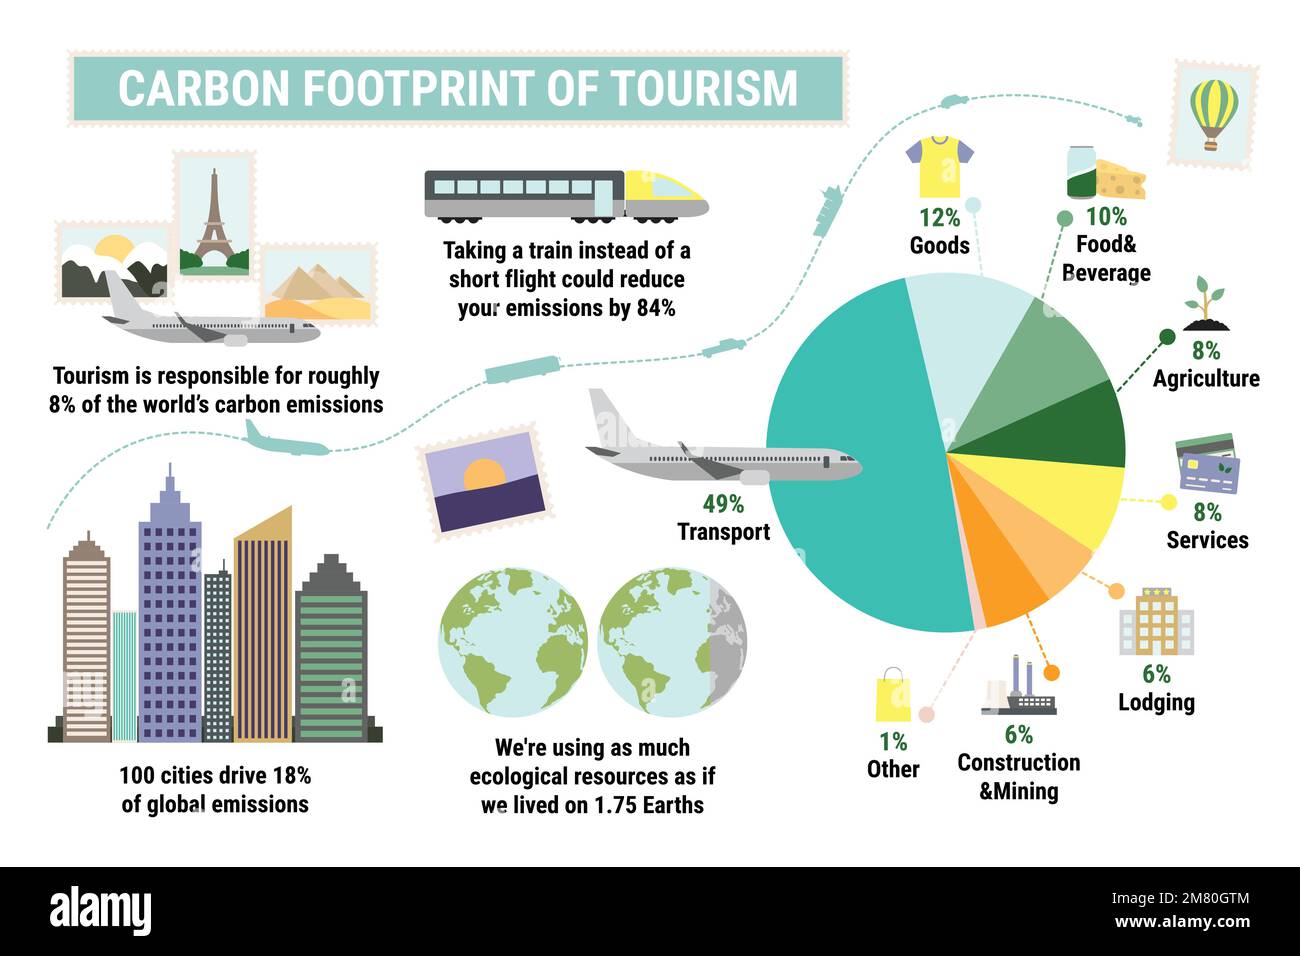 Carbon footprint of tourism sector. Carbon footprint infographic. Greenhouse gas emission by sector. Environmental and ecology concept. True data. Fla Stock Vector